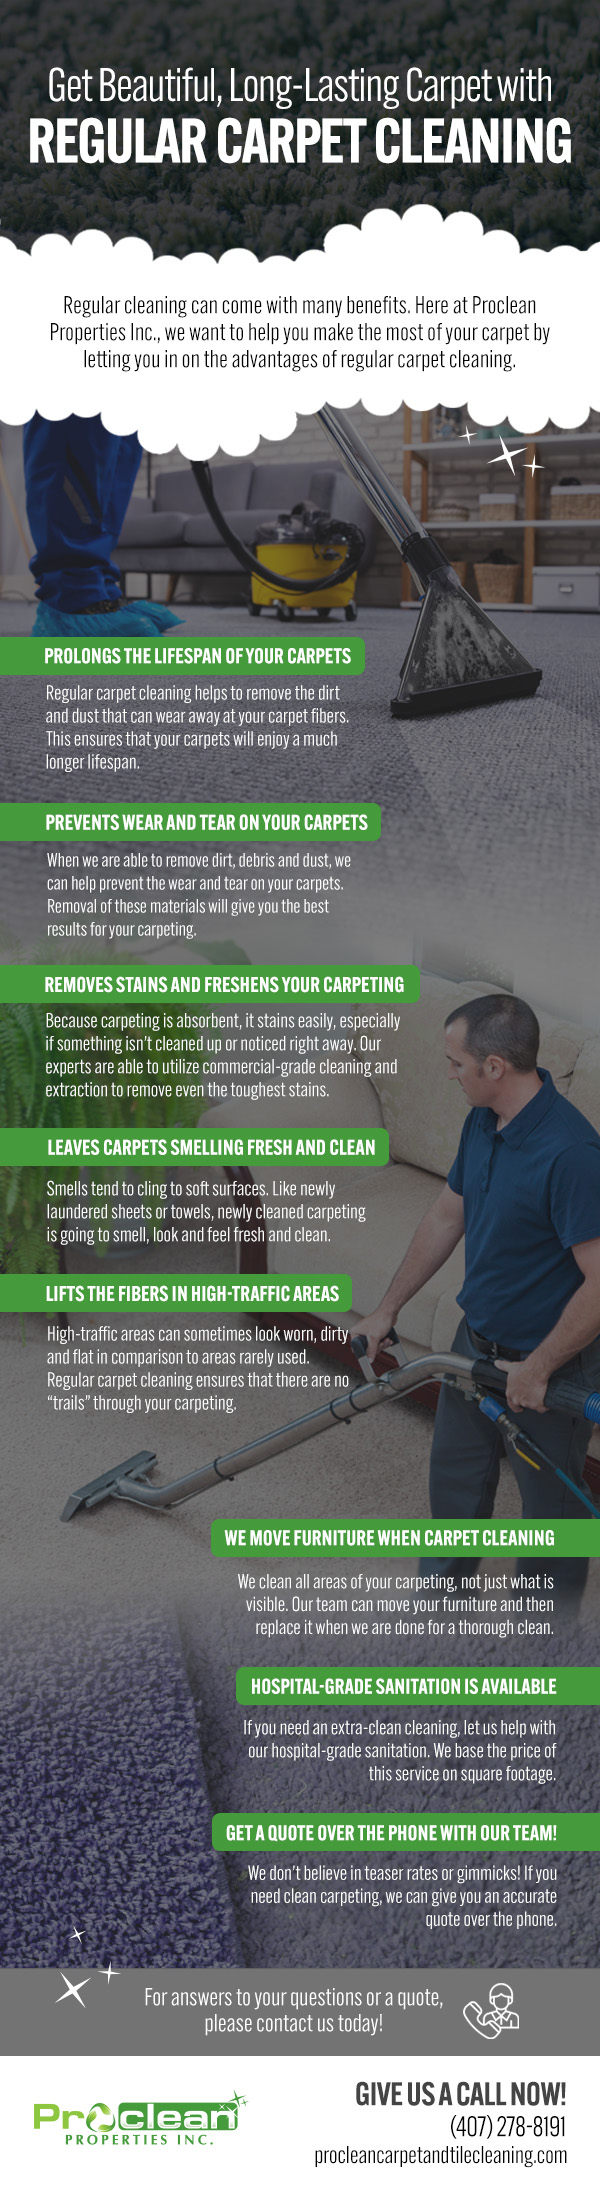 Get Beautiful, Long-Lasting Carpet with Regular Carpet Cleaning [infographic]